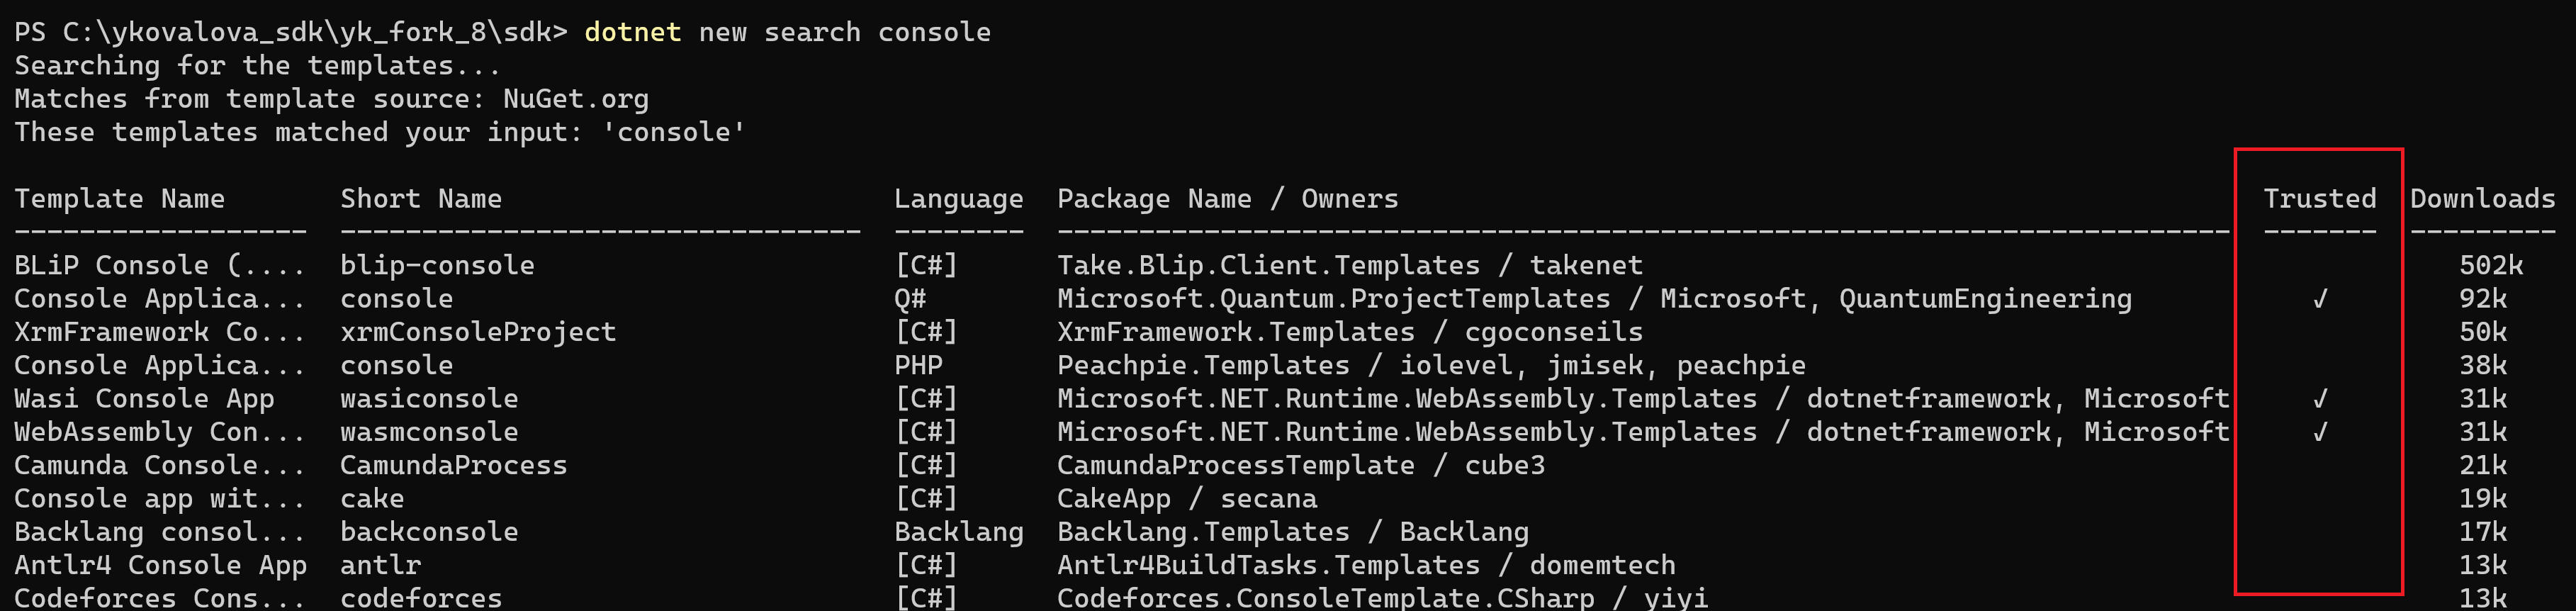 Screenshot of terminal output showing checkmark indication of trusted packages